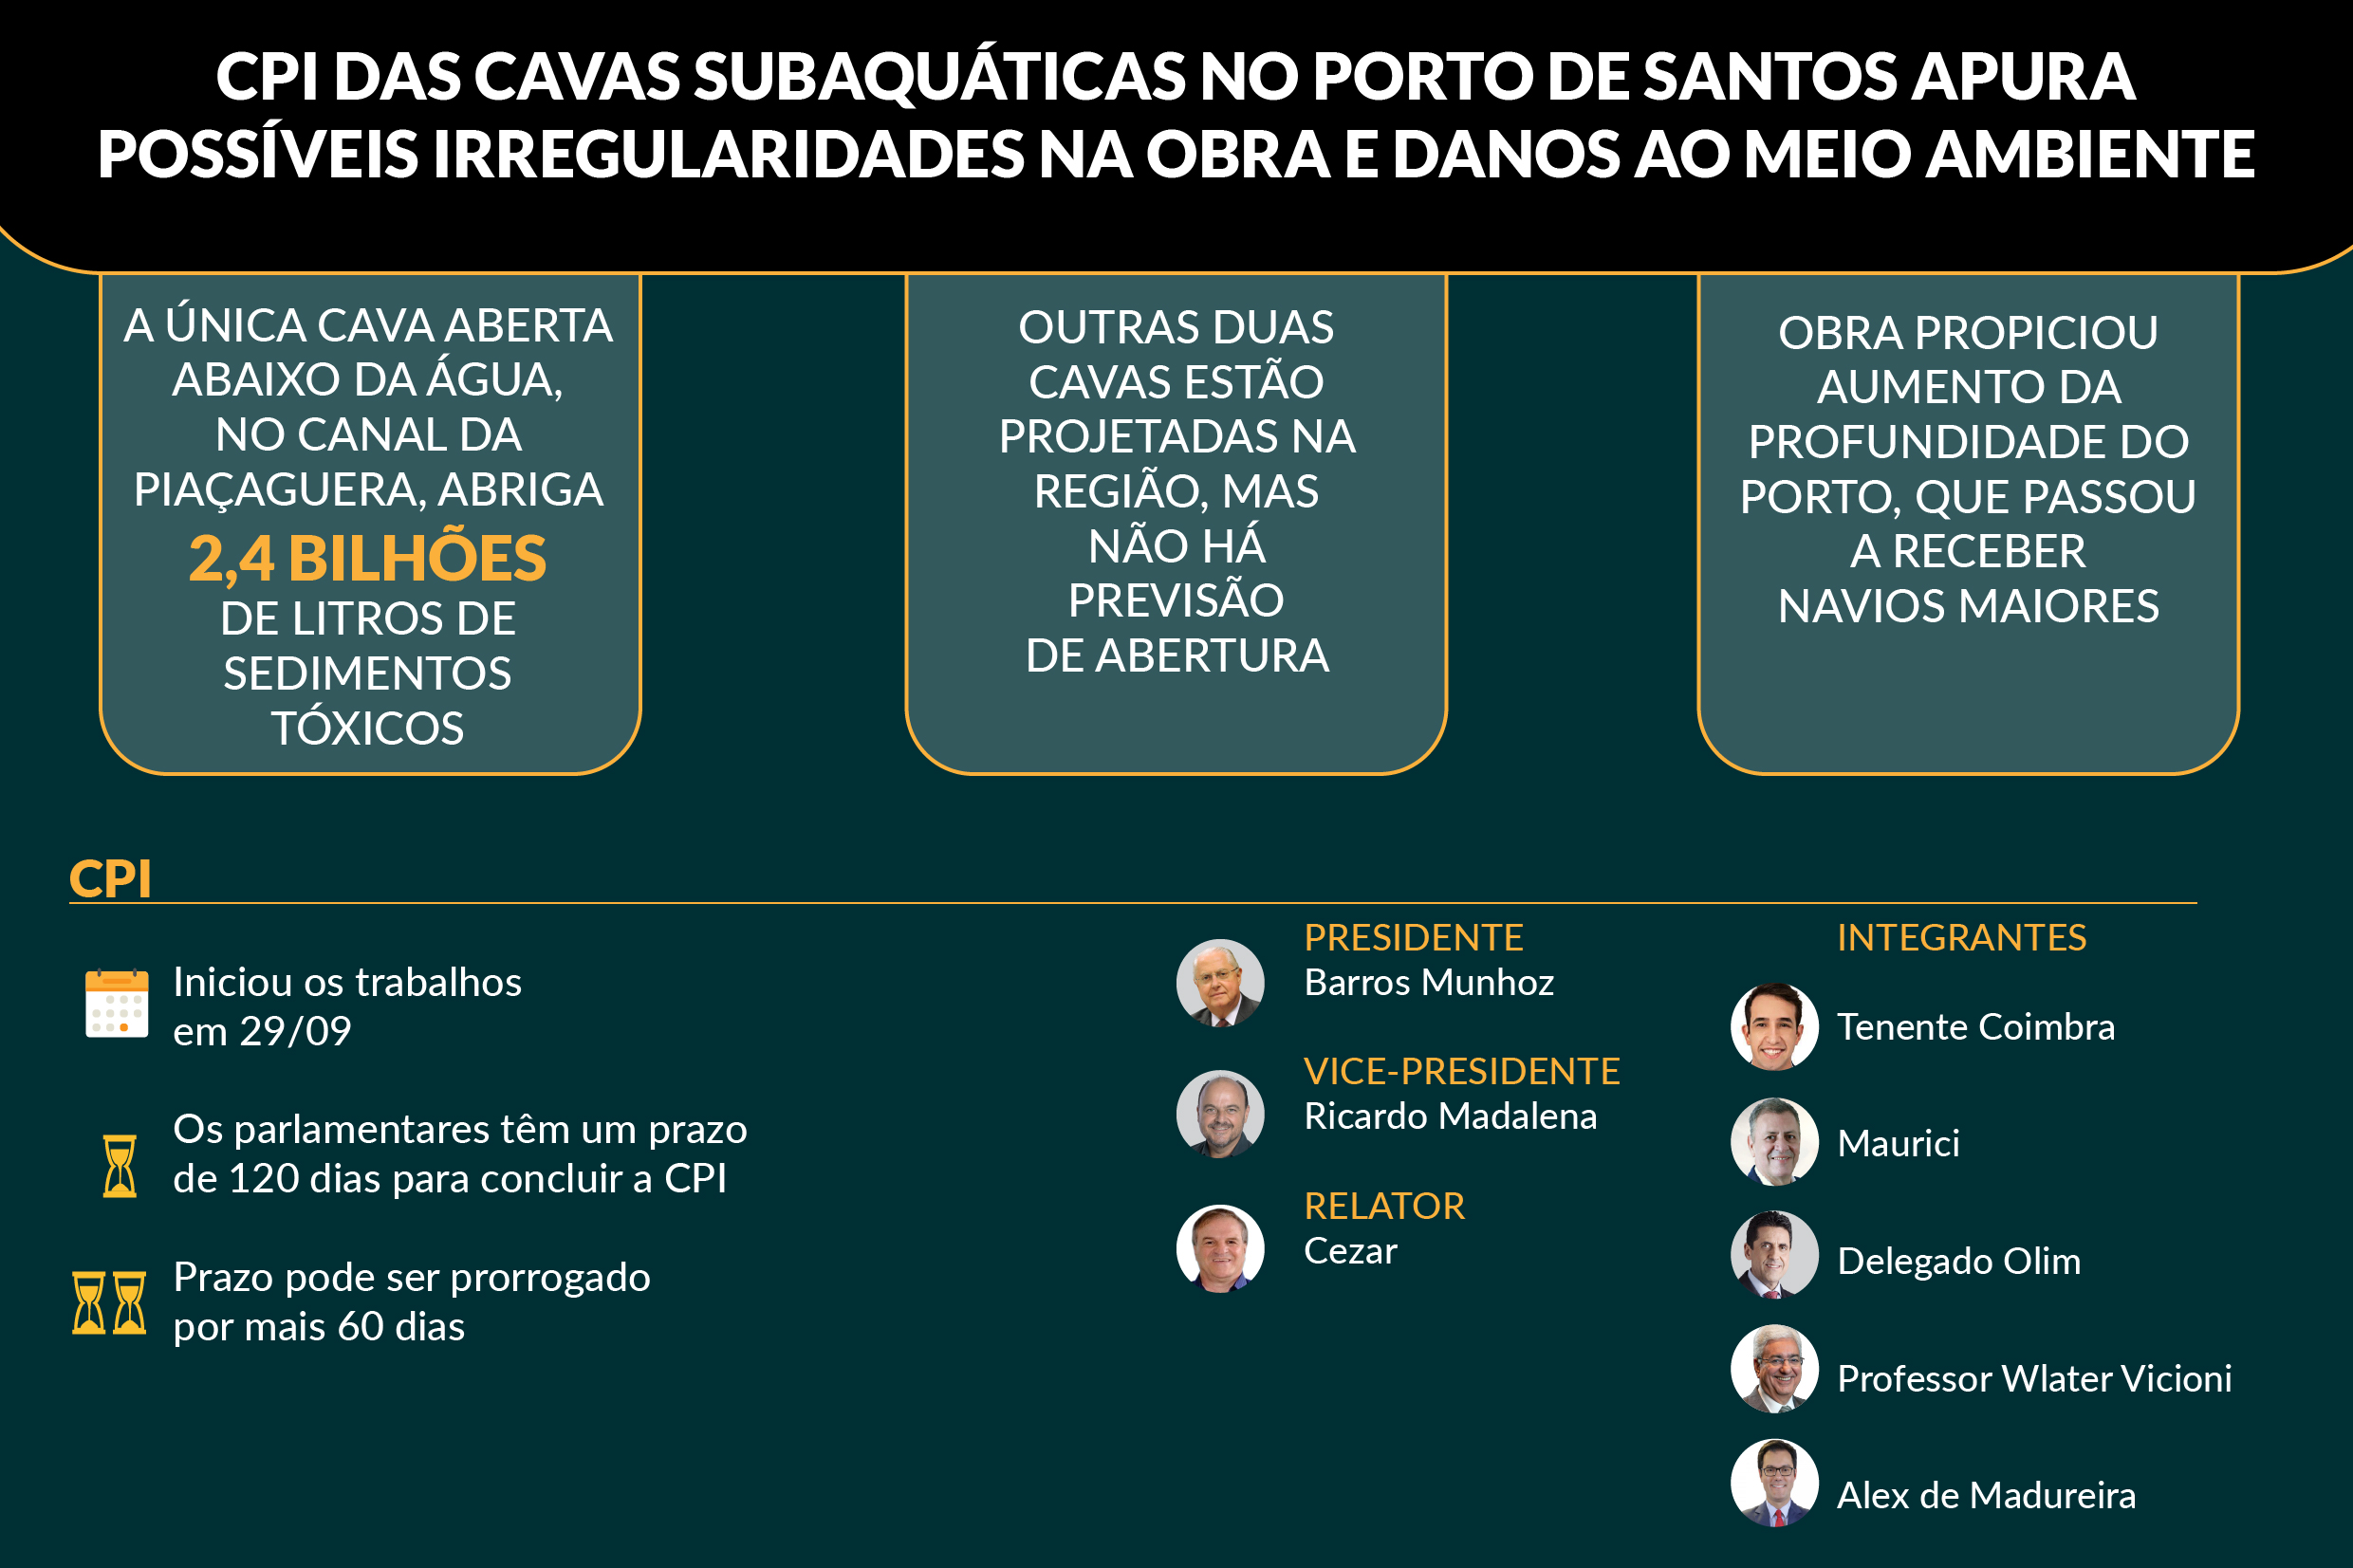 Infográfico<a style='float:right' href='https://www3.al.sp.gov.br/repositorio/noticia/N-10-2021/fg276452.jpg' target=_blank><img src='/_img/material-file-download-white.png' width='14px' alt='Clique para baixar a imagem'></a>